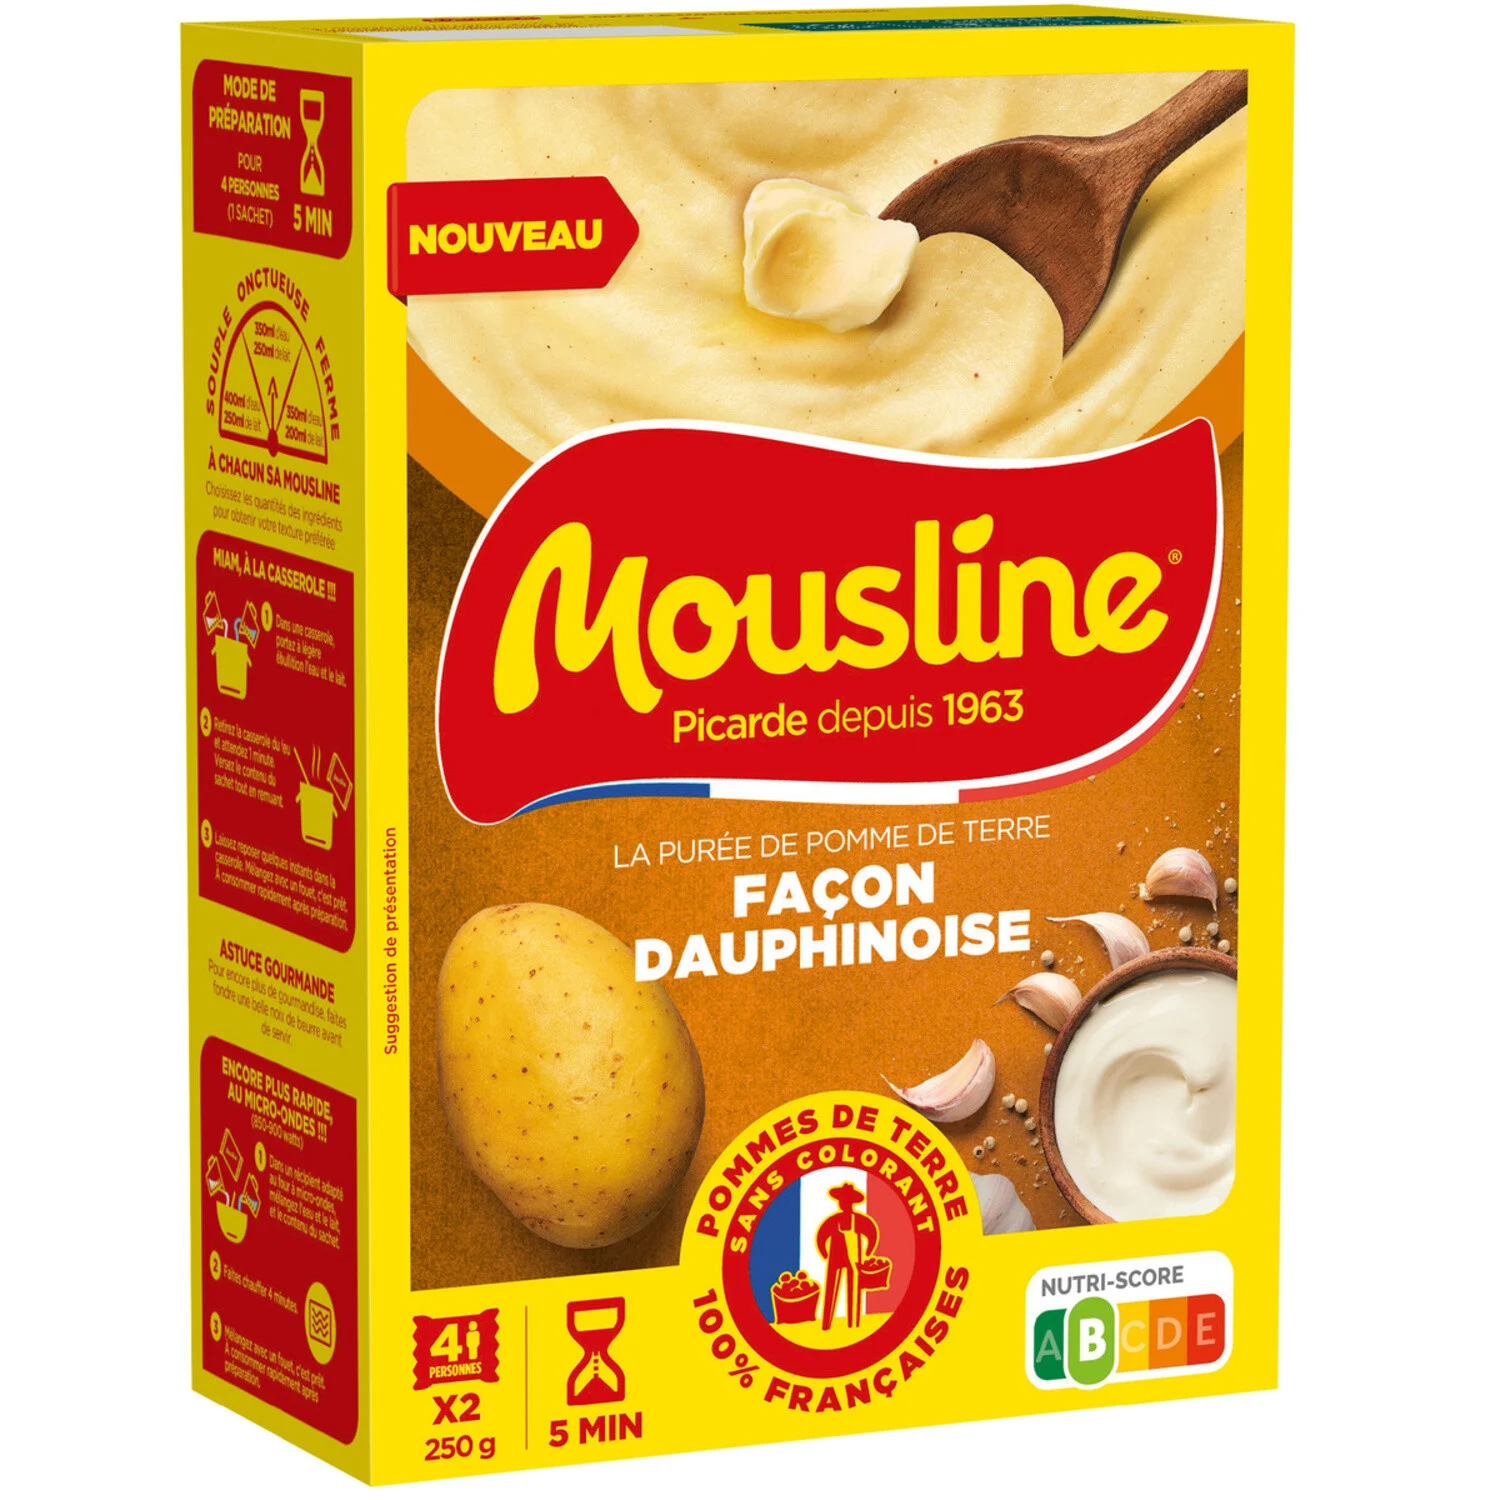 2x125g Mousse Dauphinoise